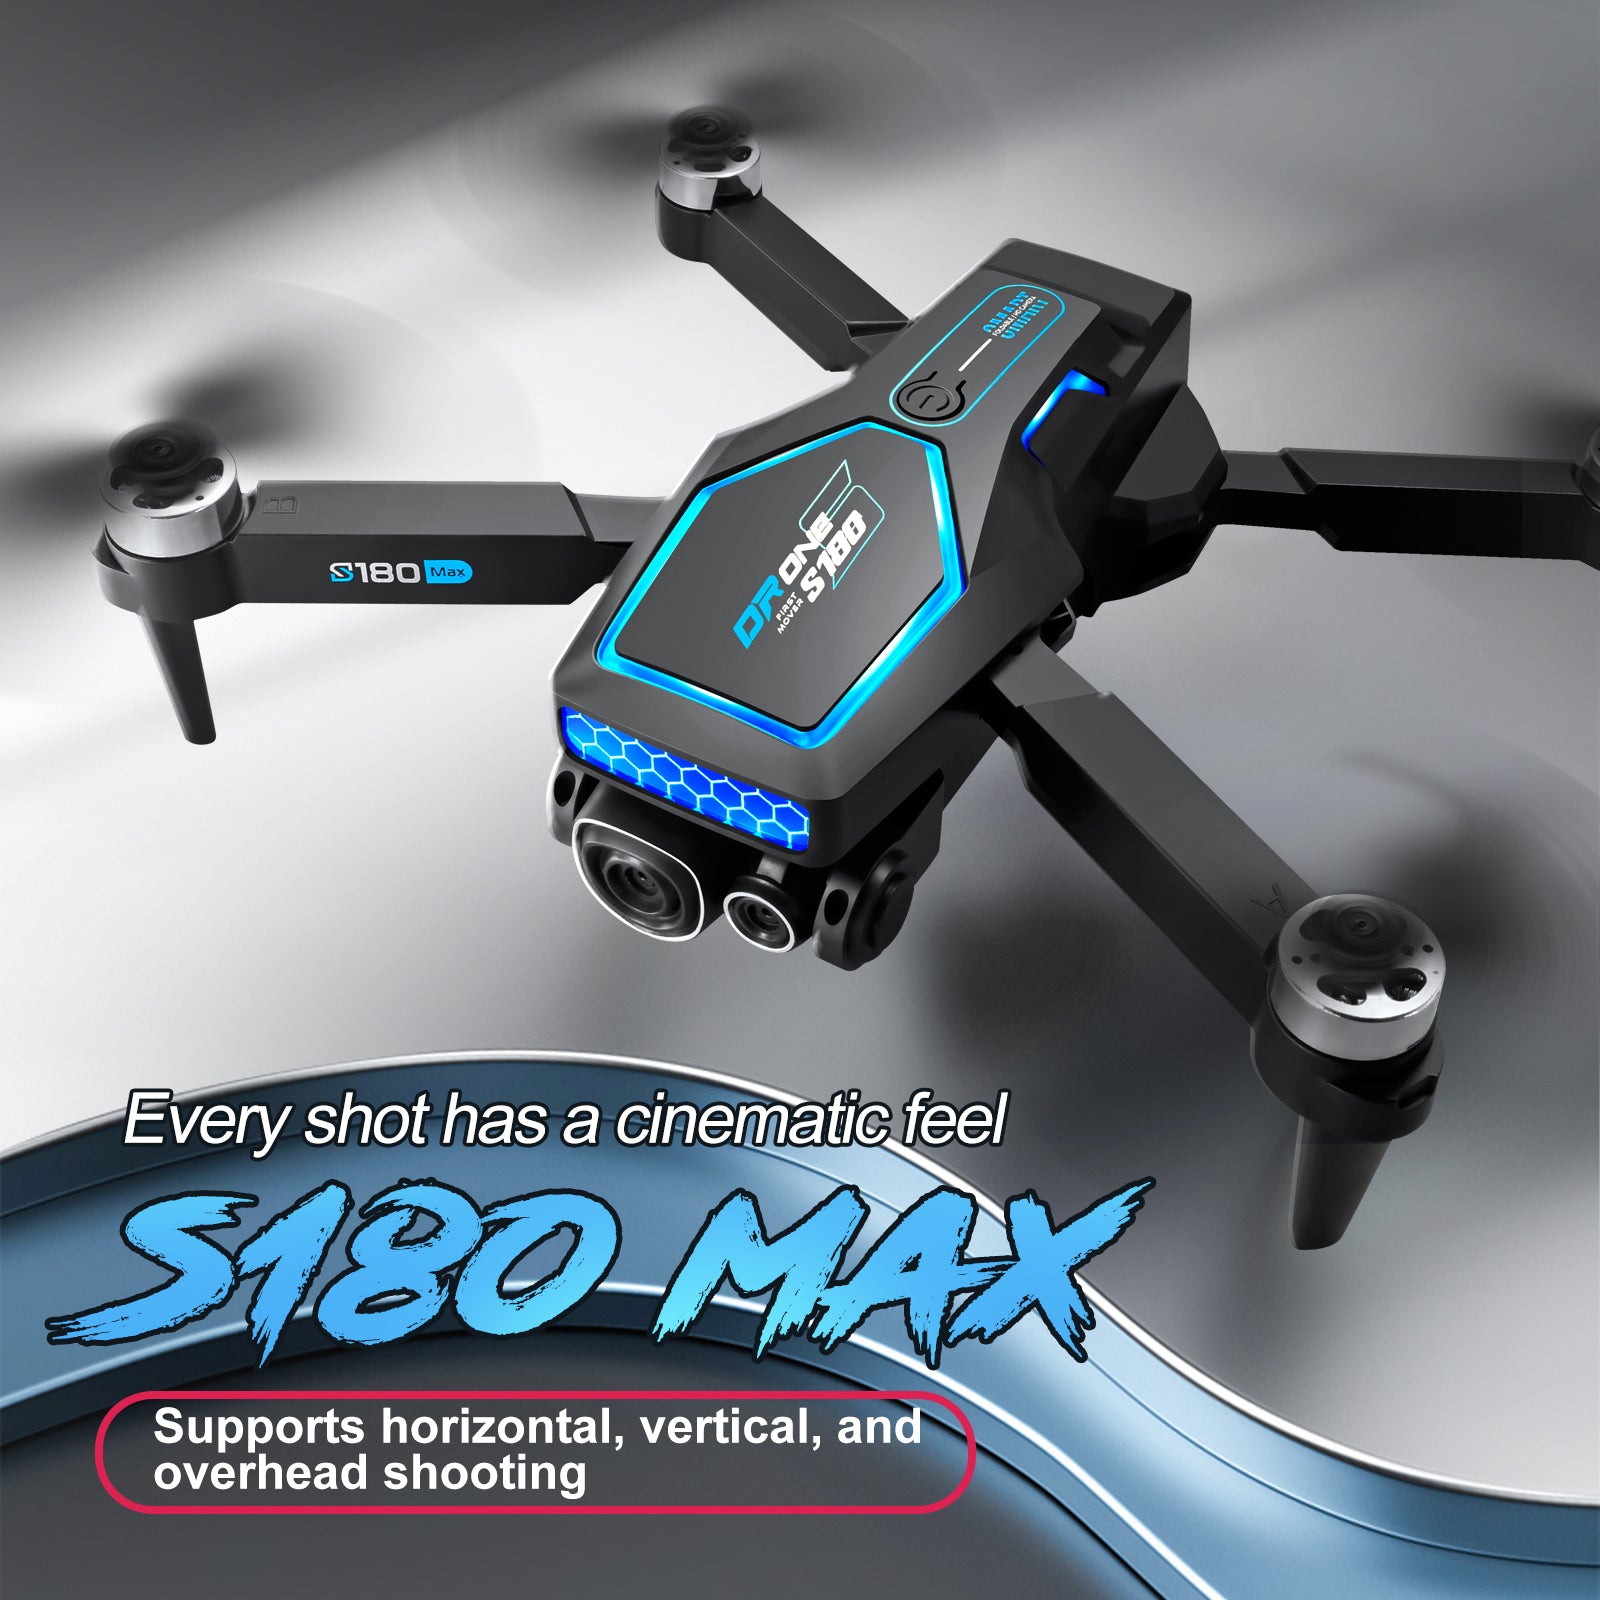 Capture cinematic moments with the S180 Drone's flexible 360-degree shooting capabilities.